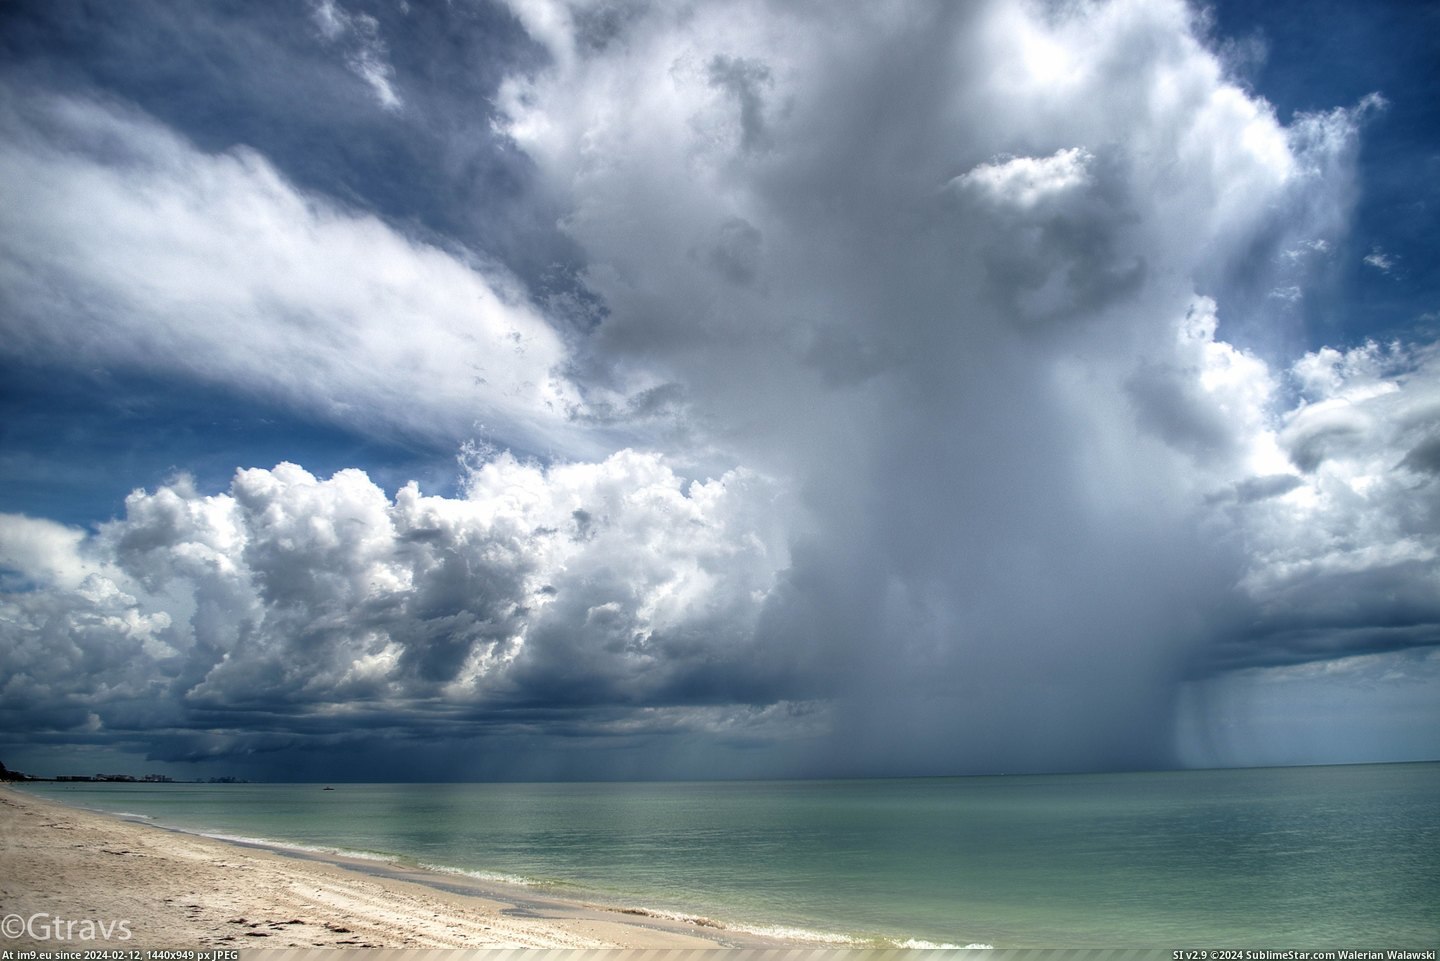 #Photo #Shower #North #Miles #Greg #Isolated #Travers #Rain #Naples #Florida [Earthporn] A photo I took of an isolated rain shower about 15 miles north of Naples, Florida. ©Greg Travers [4935x3266] Pic. (Obraz z album My r/EARTHPORN favs))